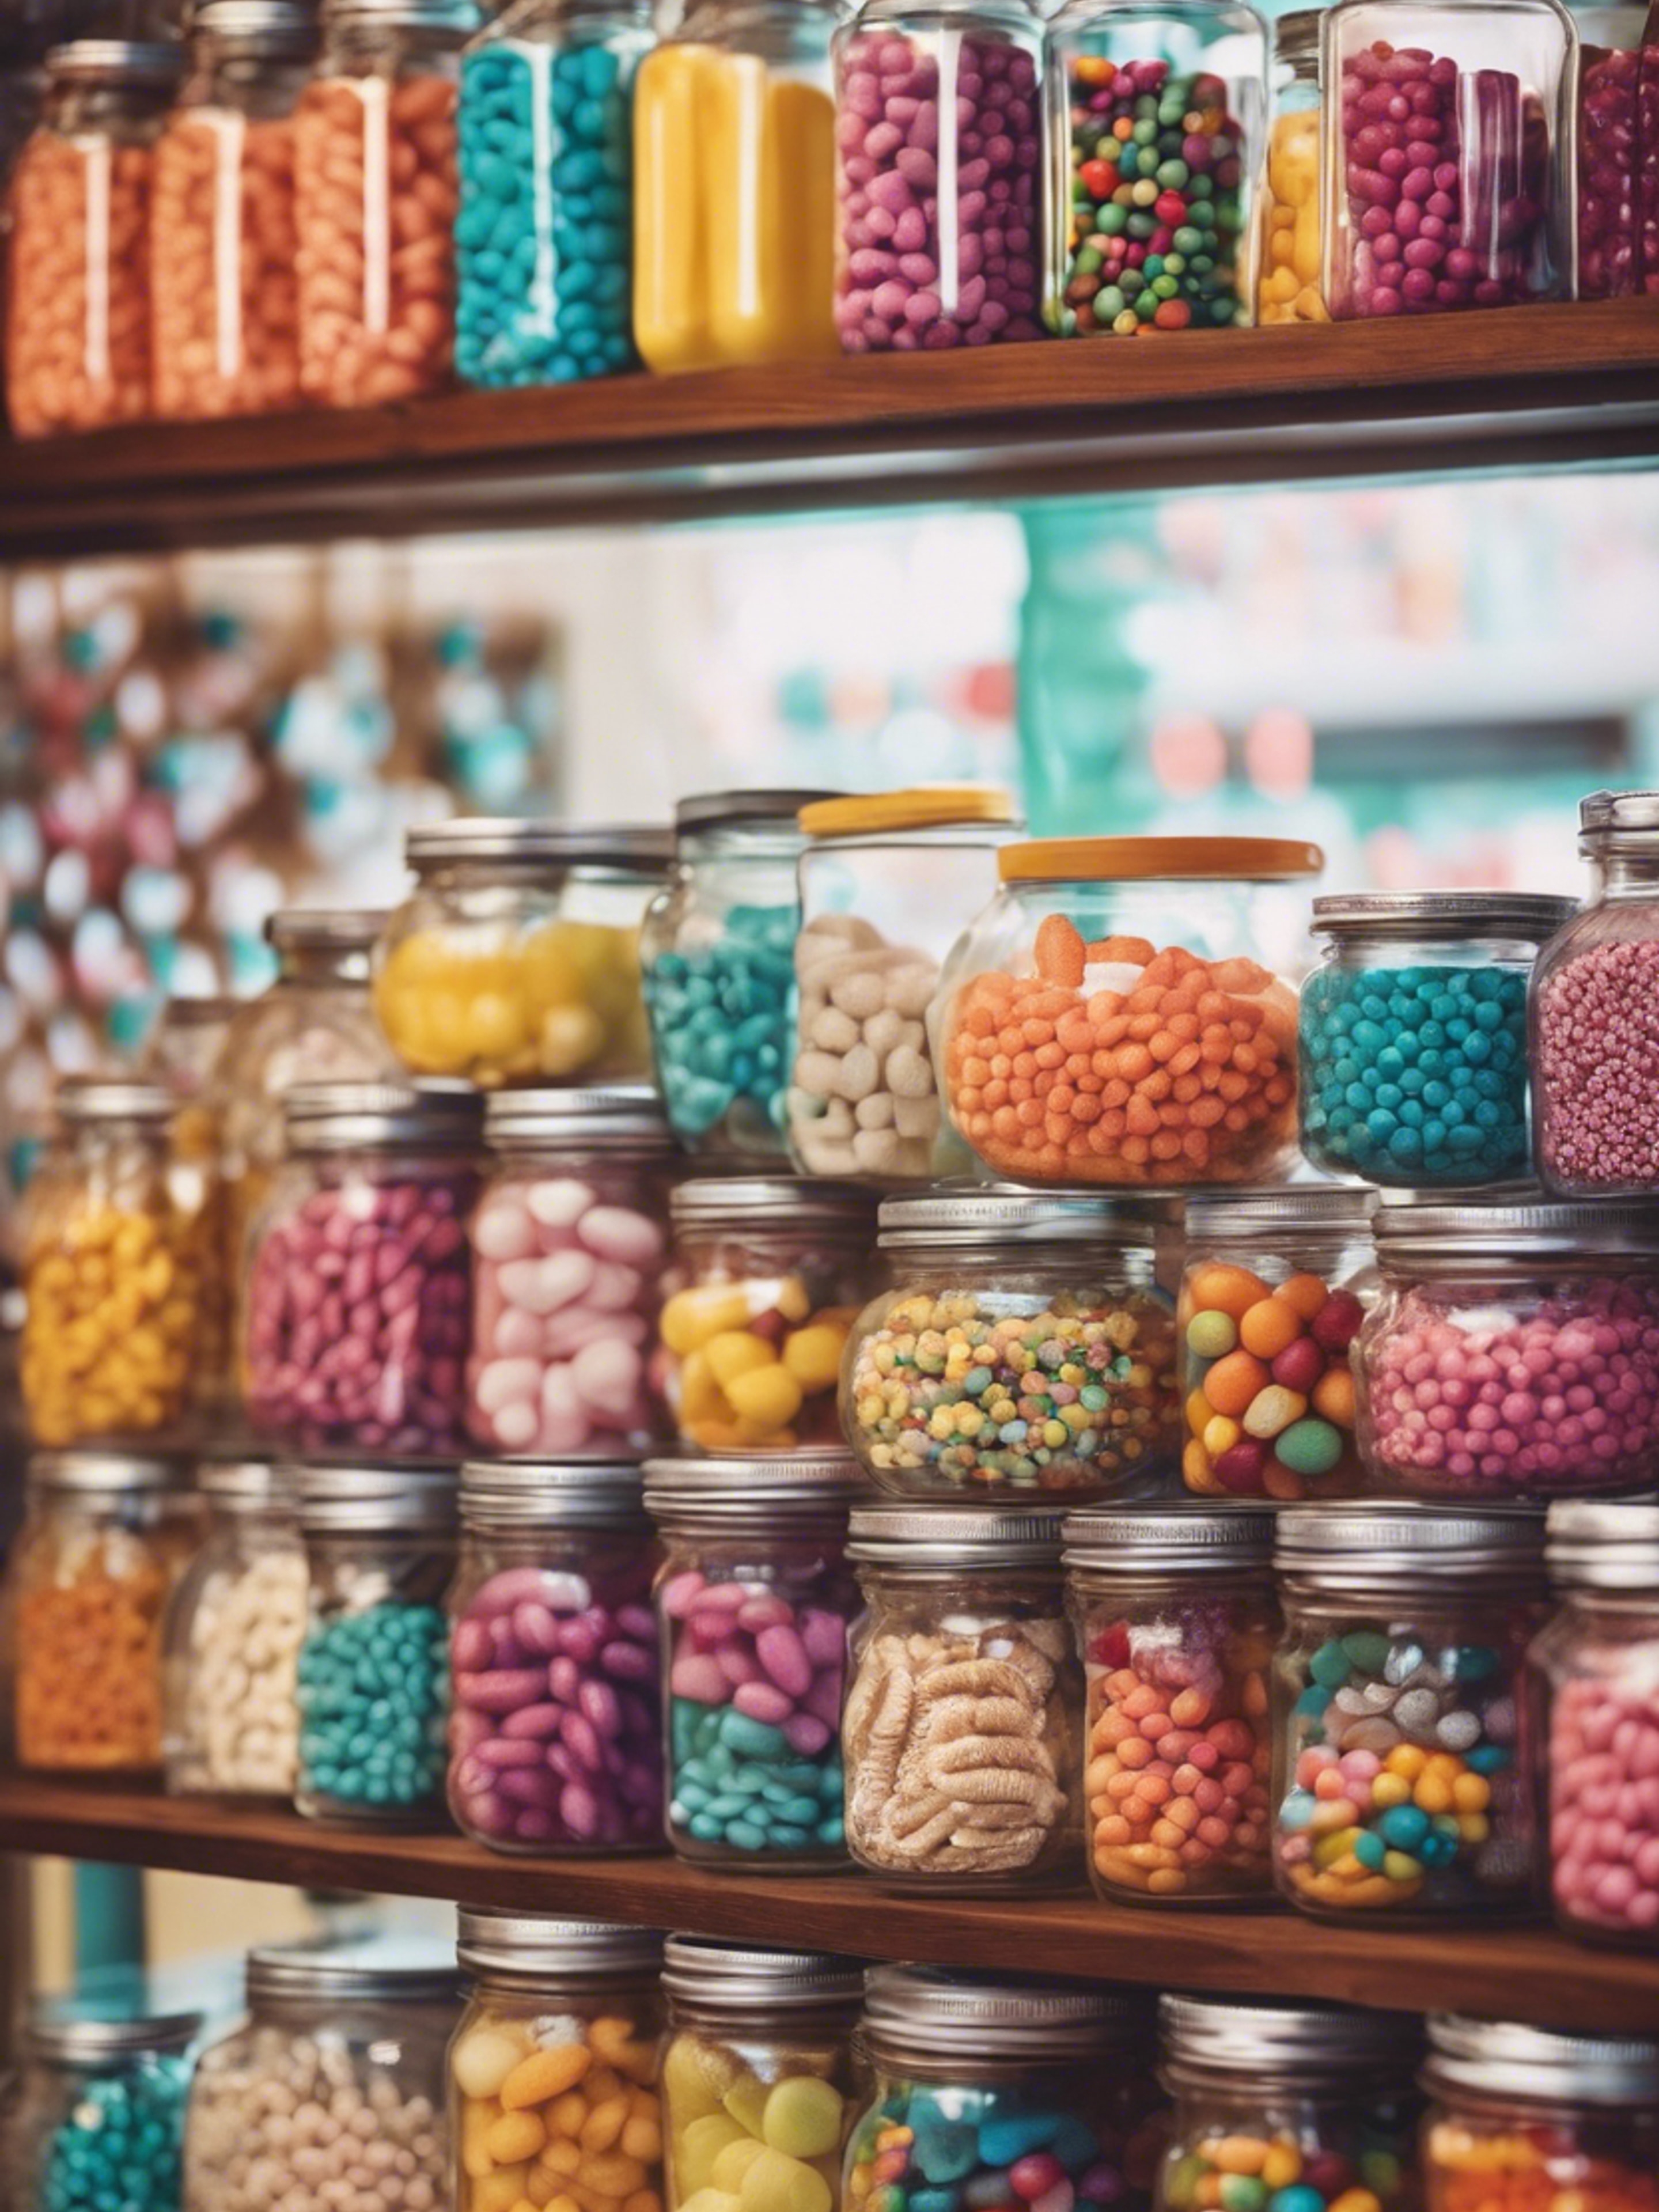 Retro candy store filled with jars of colorful treats.壁紙[53bdbe1ef5c6451abca1]